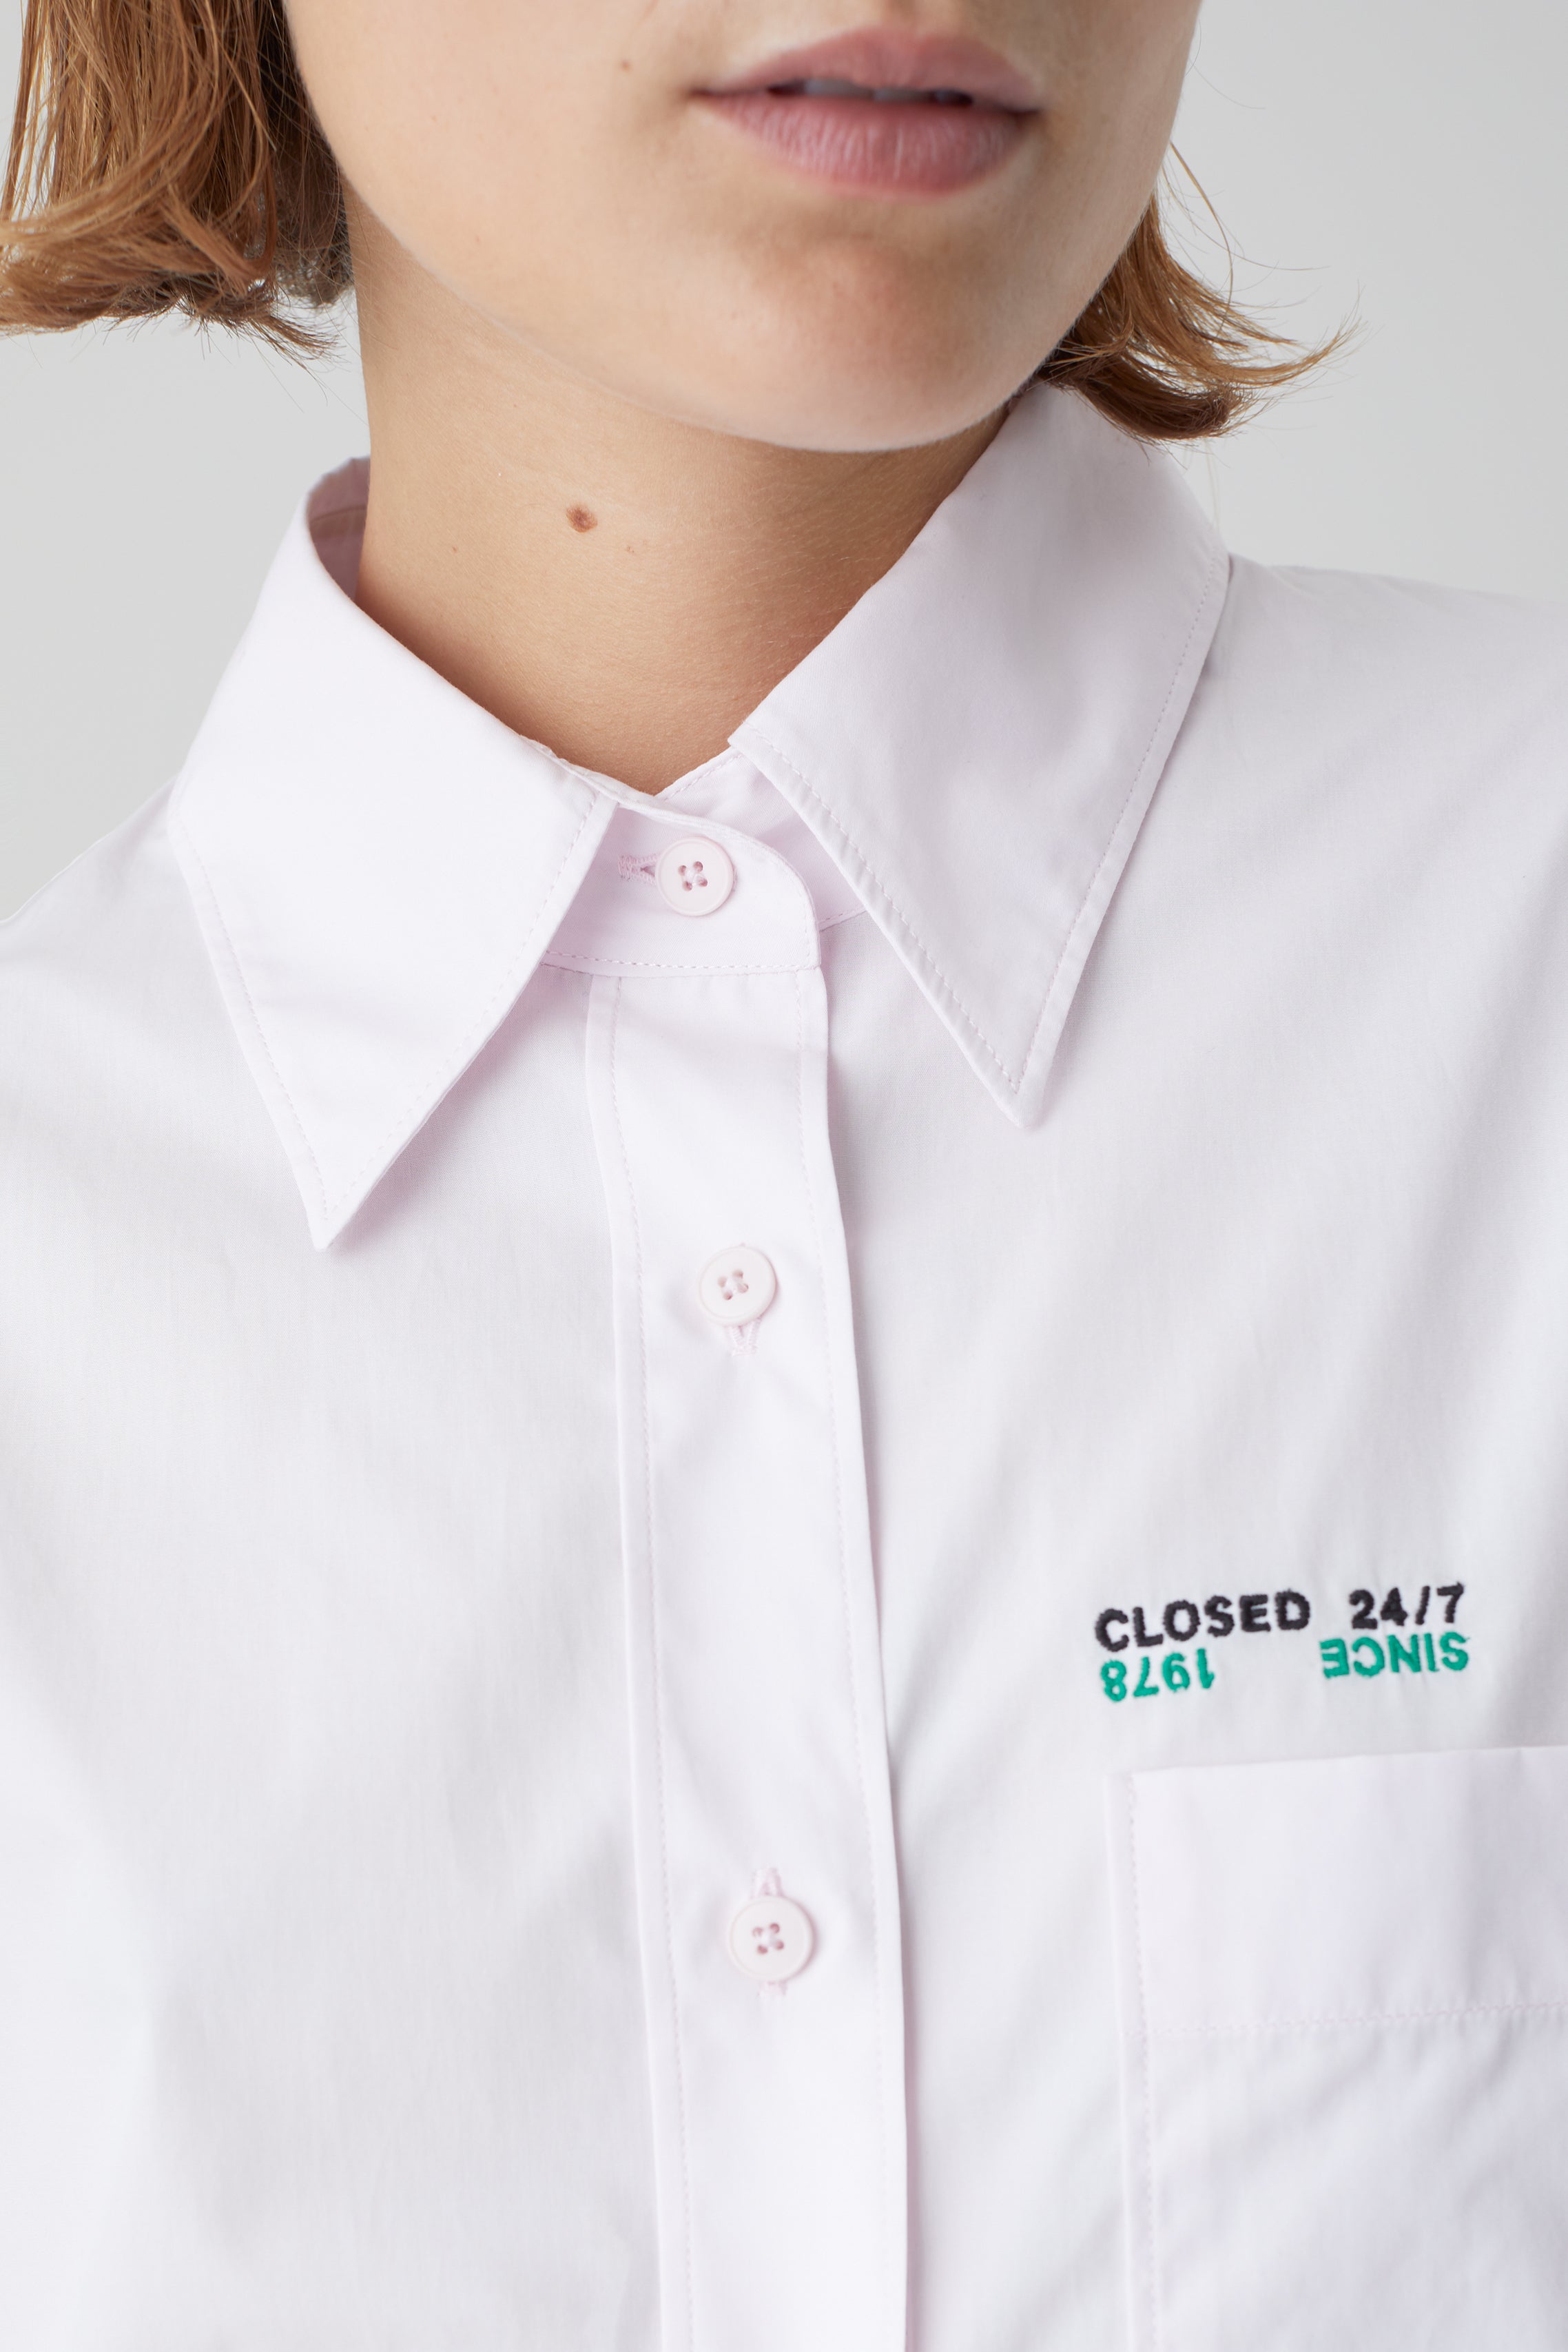 CLOSED-OUTLET-SALE-SHIRT-WITH-POCKET-Blusen-ARCHIVE-COLLECTION-3_2a7fb9b8-1f91-484c-9654-54a871d8c784.jpg